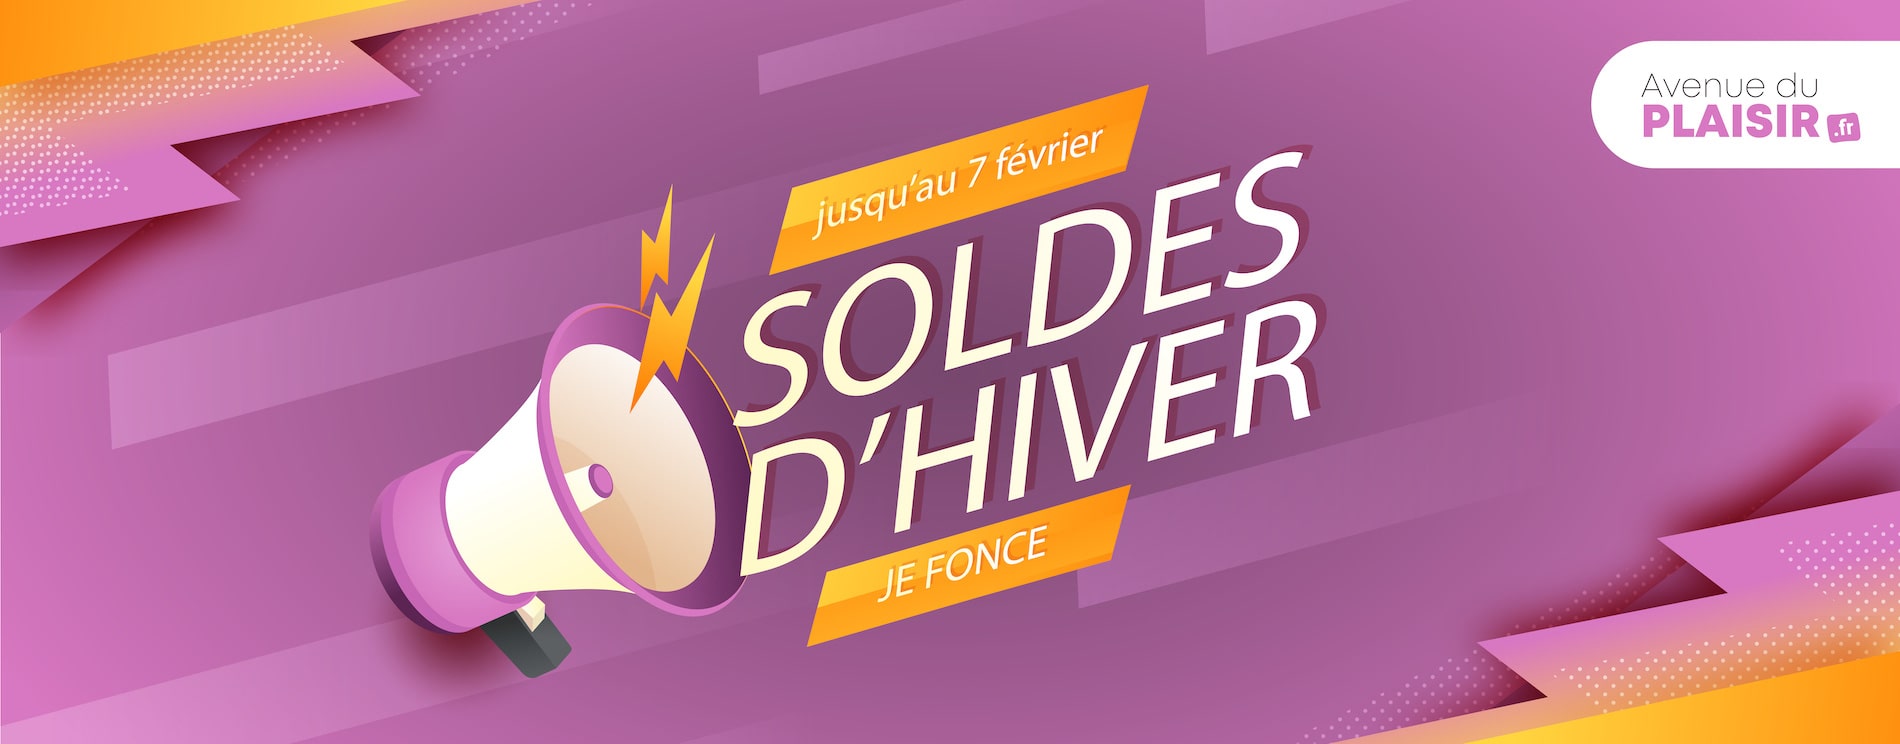 Soldes hivers